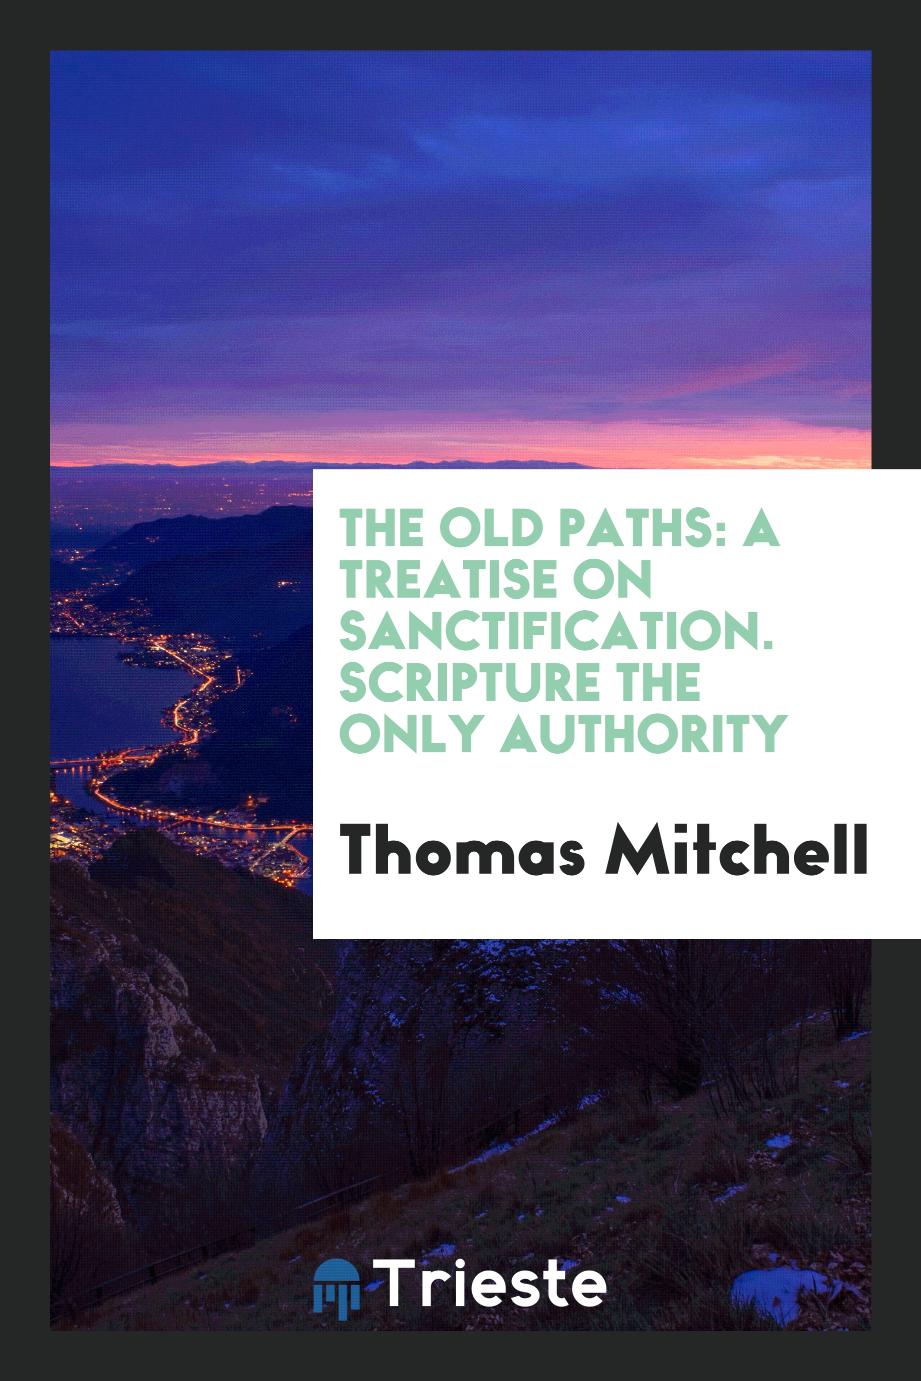 The old paths: a treatise on sanctification. Scripture the only authority